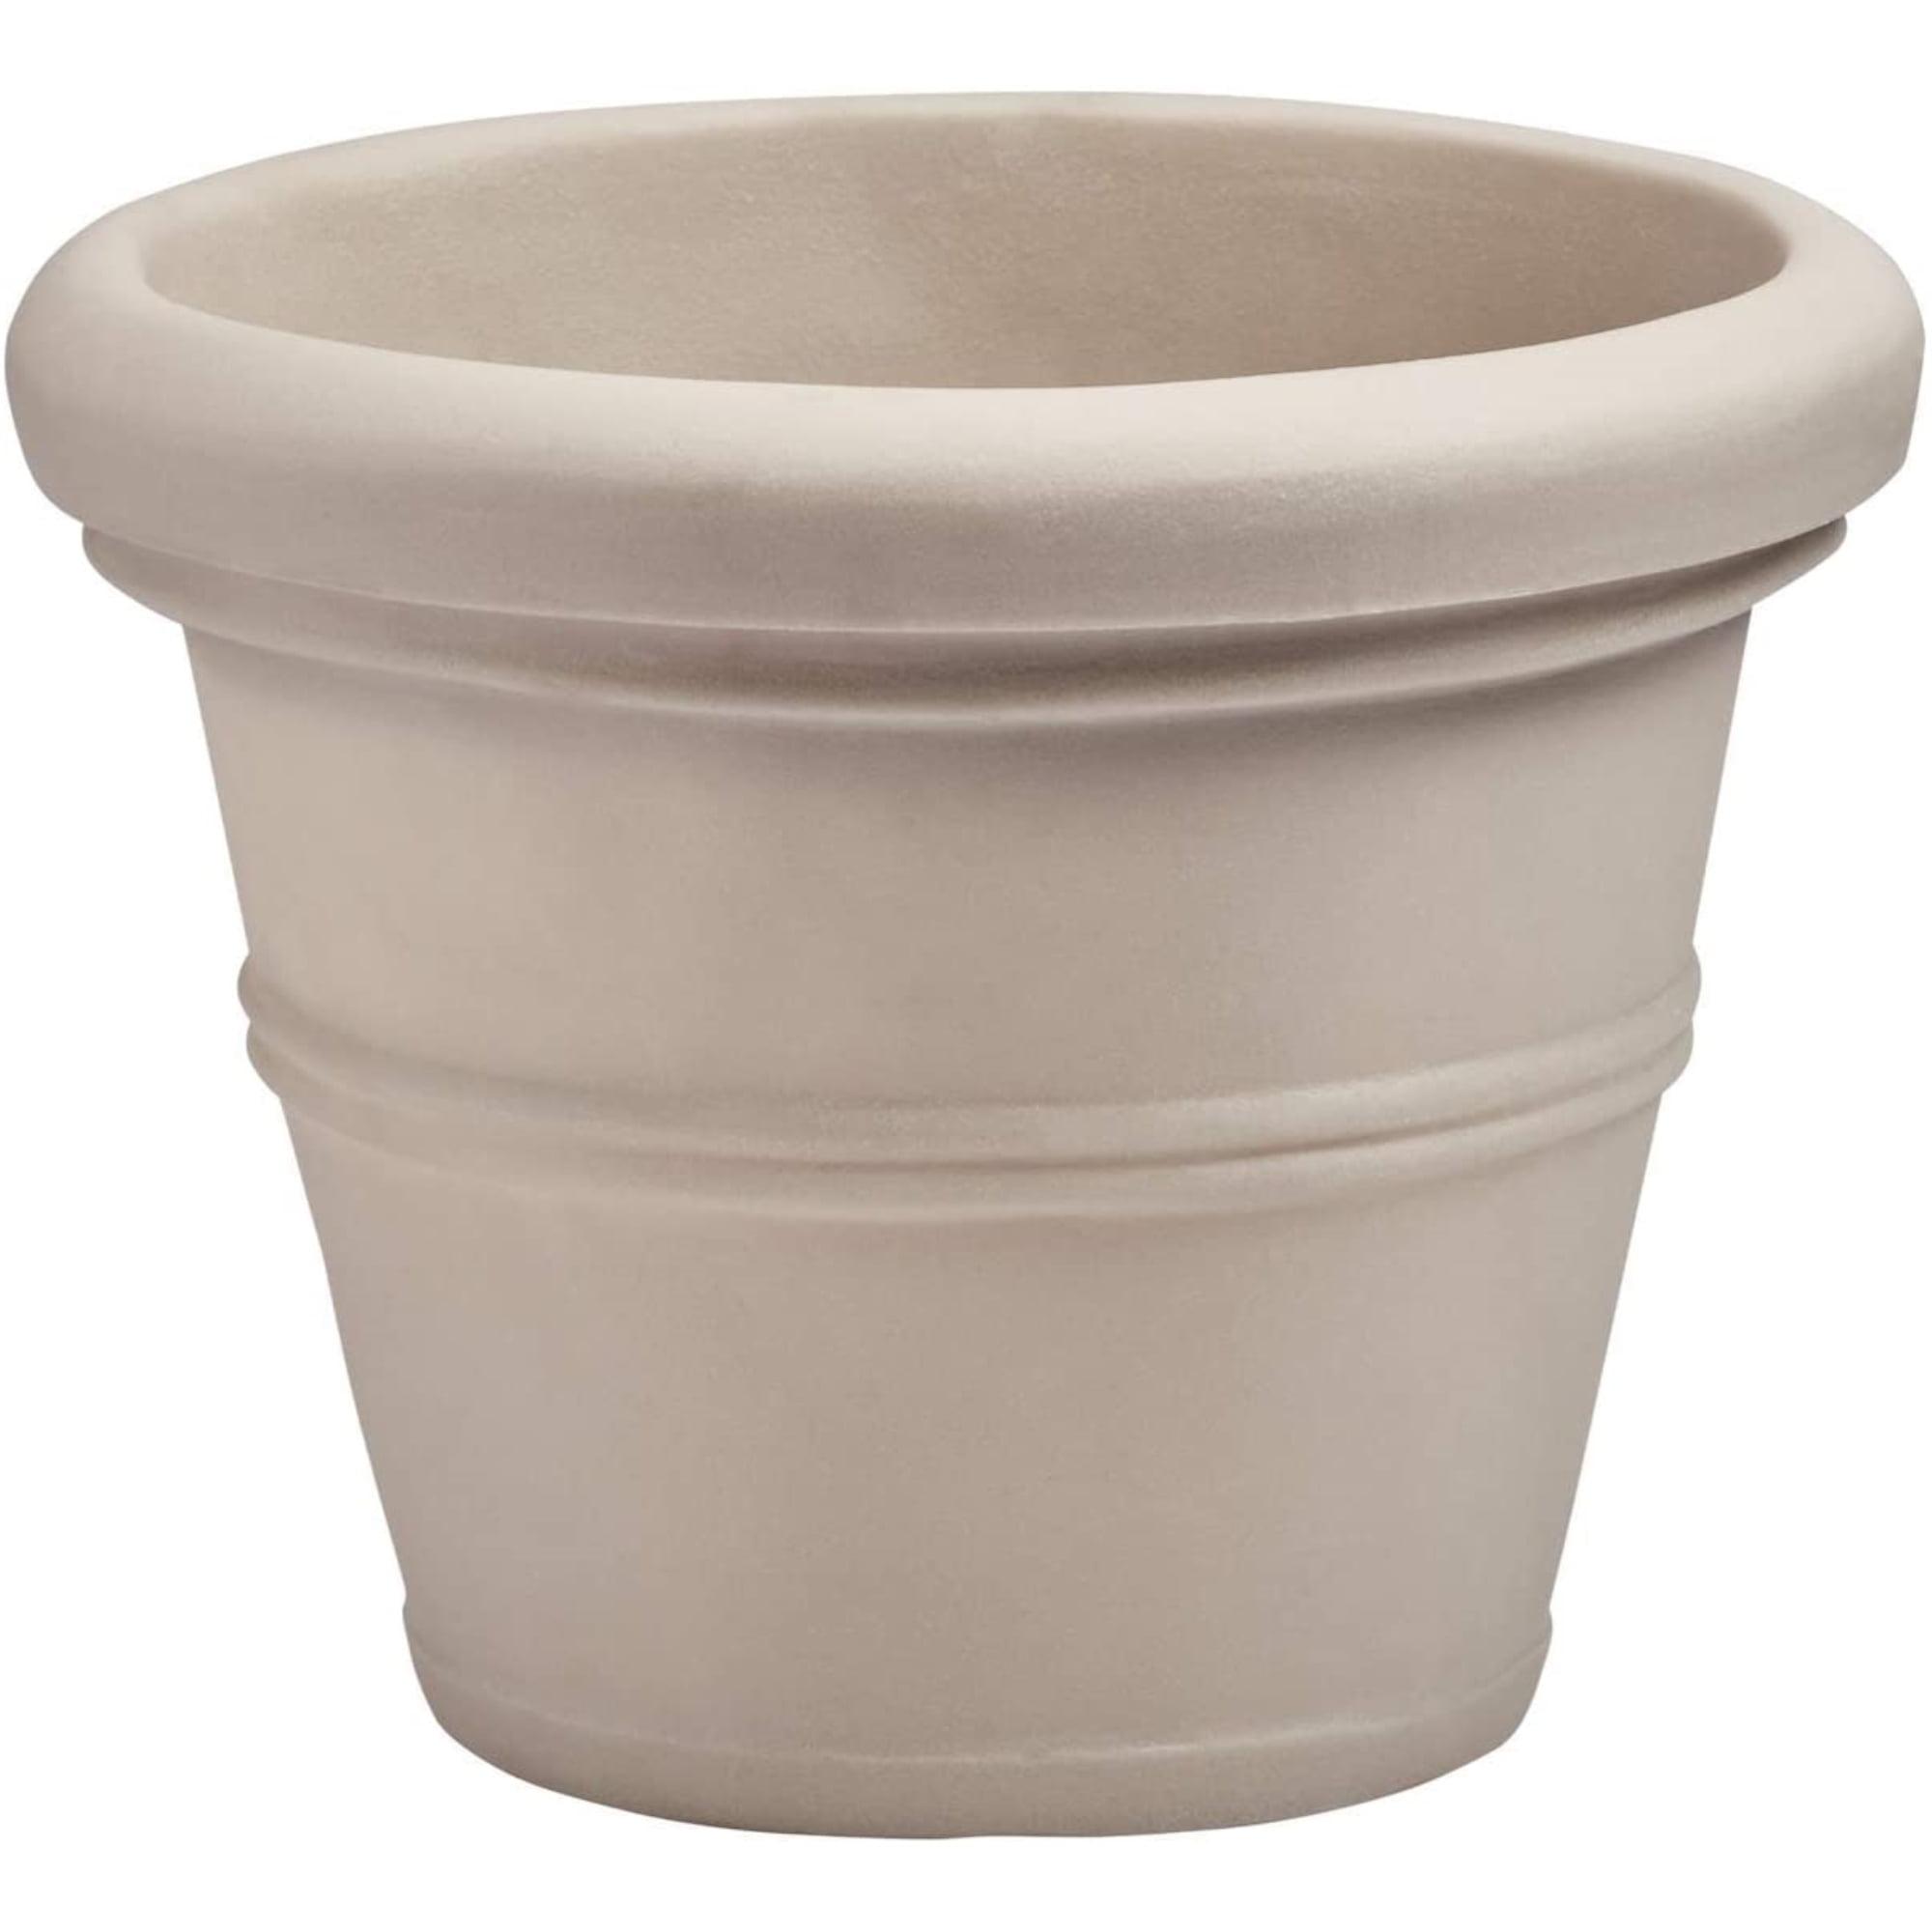 Classic Rolled-Rim Weathered Stone Planter, 16-inch